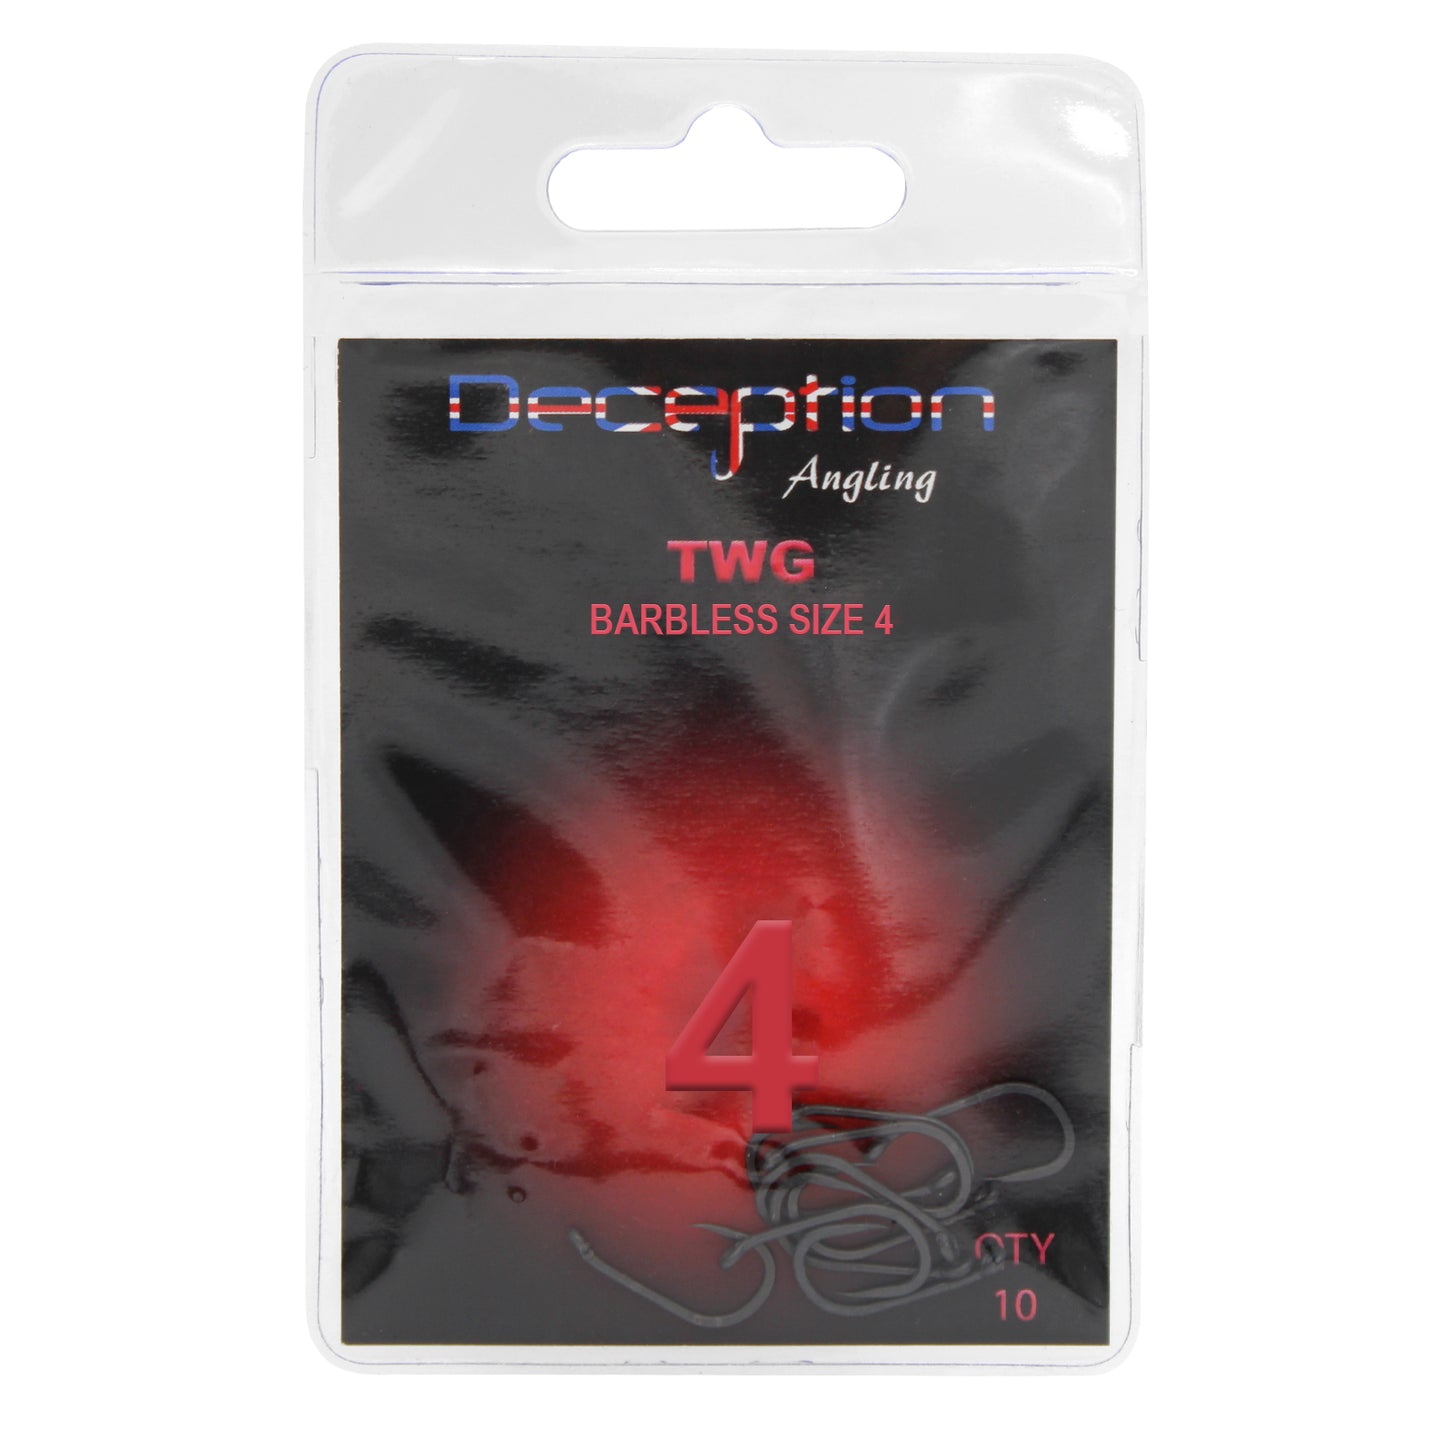 Deception Angling TWG Barbless Fishing Hooks Pack of 10 - Size 4